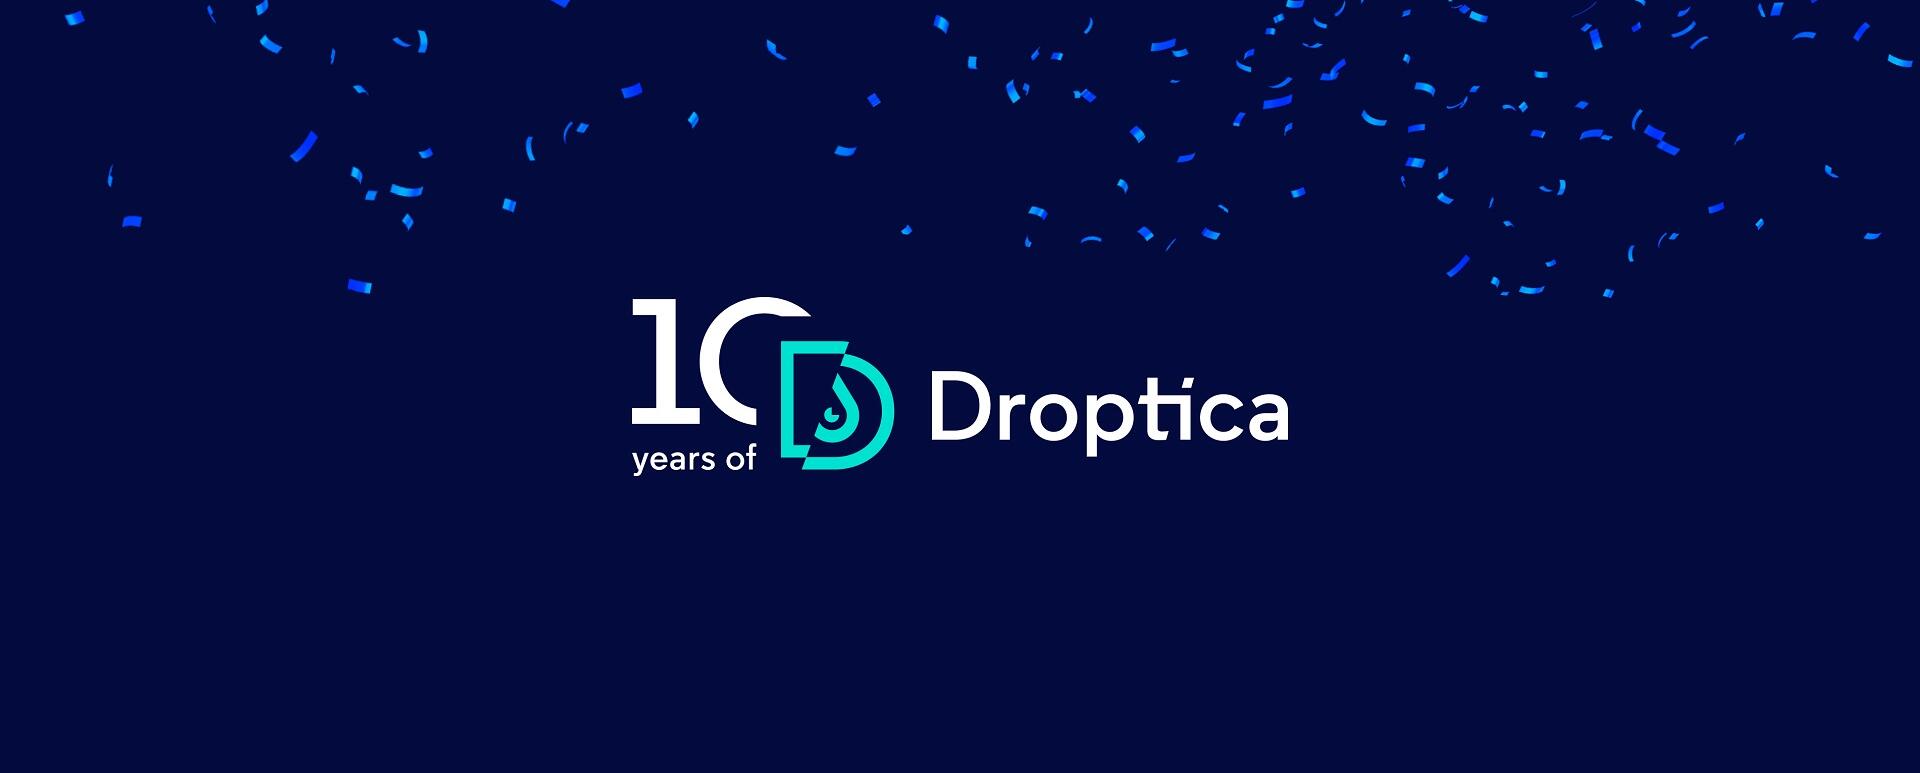 Droptica celebrated its tenth anniversary in February 2023, marking its long market presence.